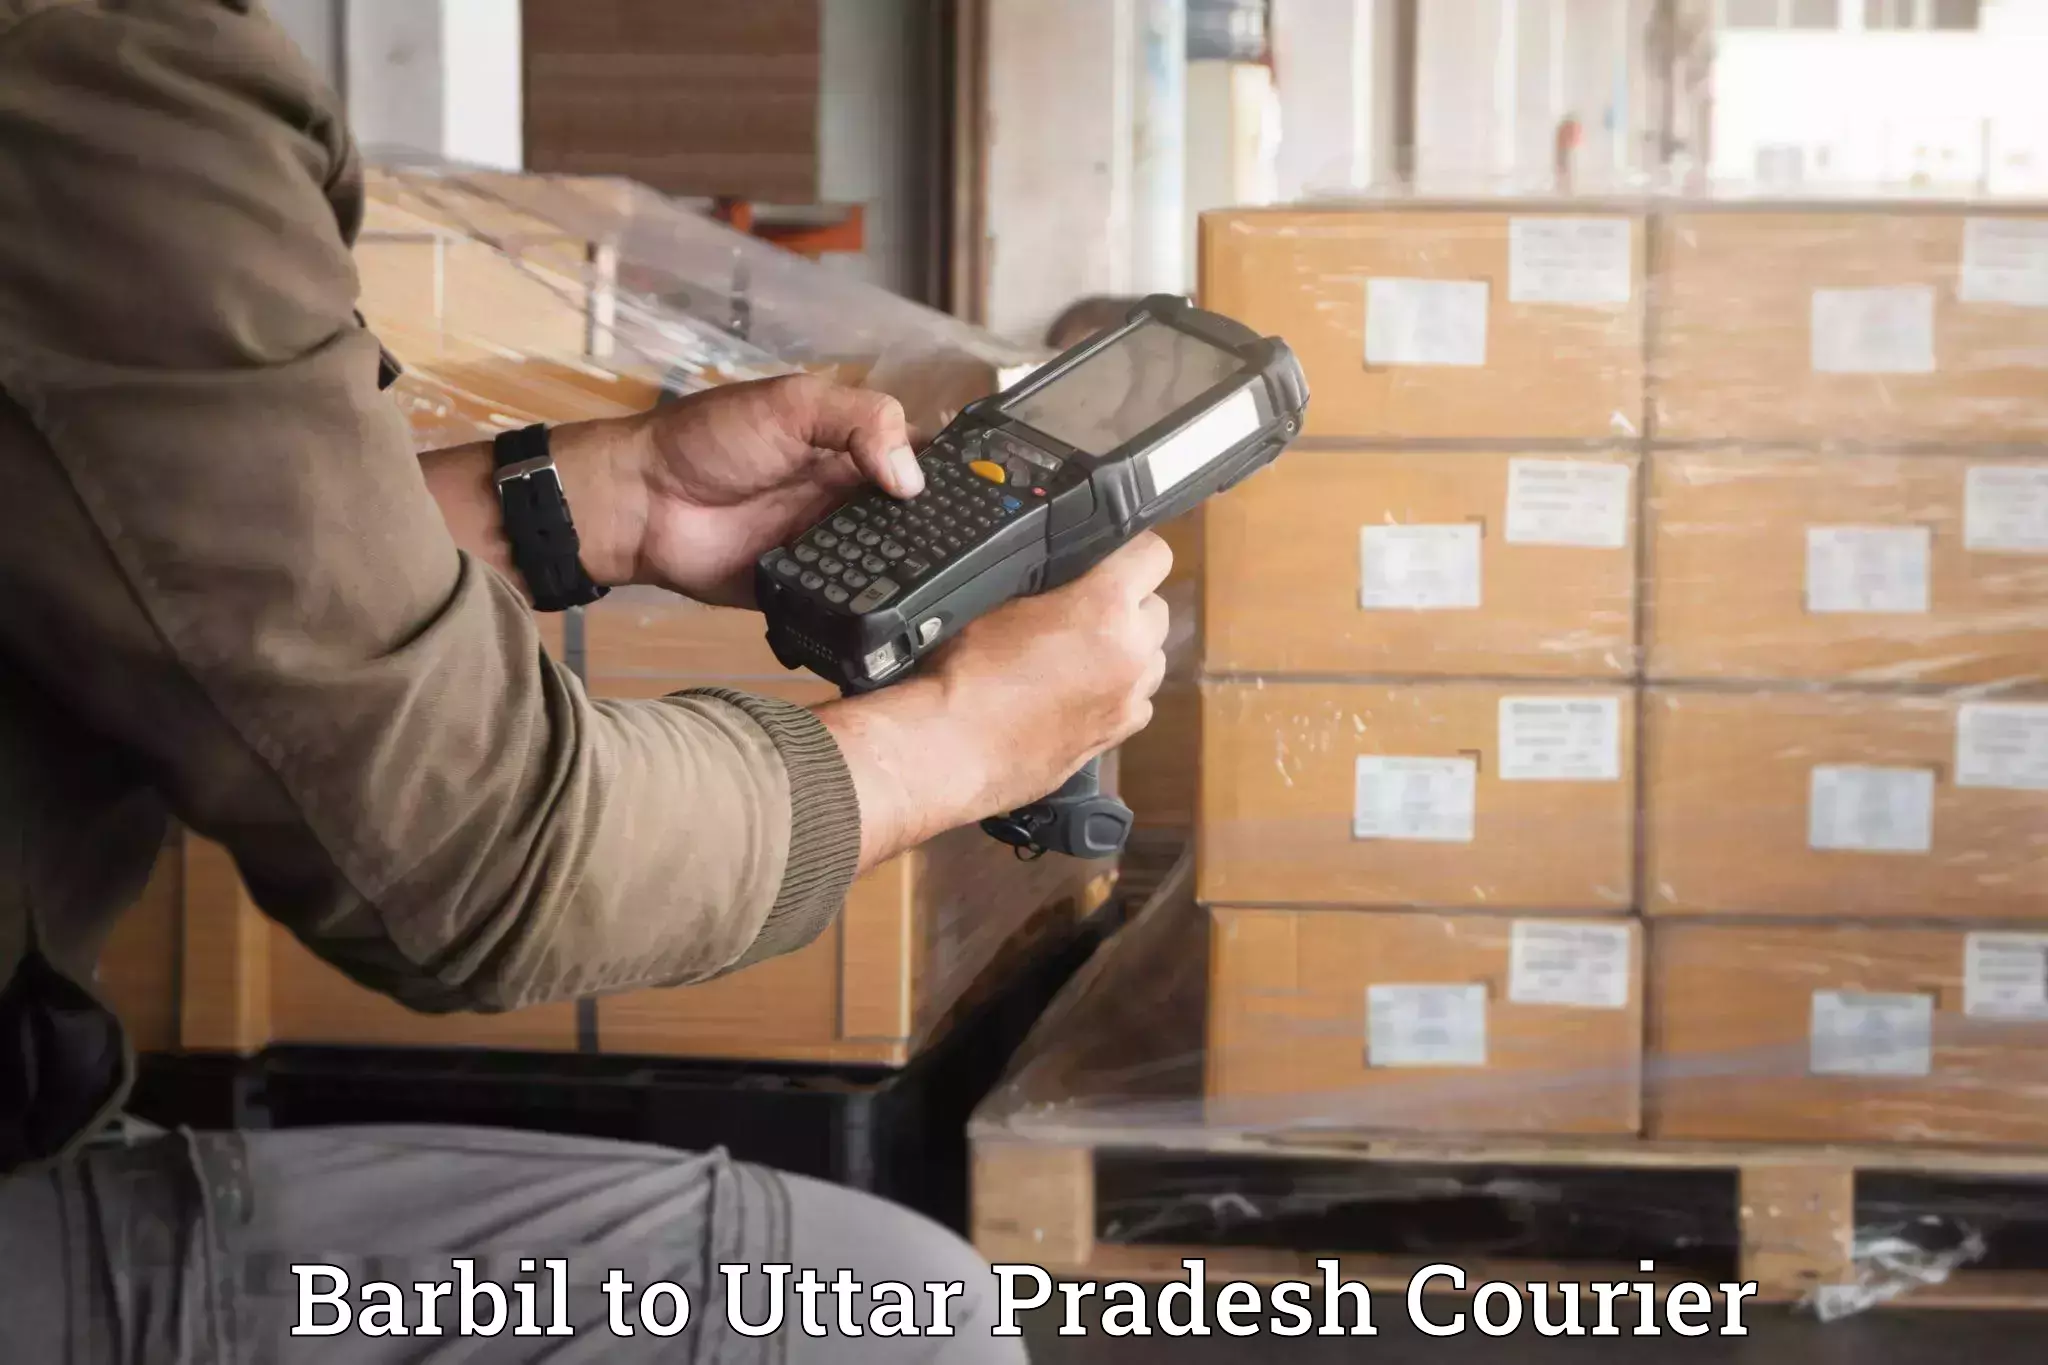 Hassle-free relocation in Barbil to Ghazipur